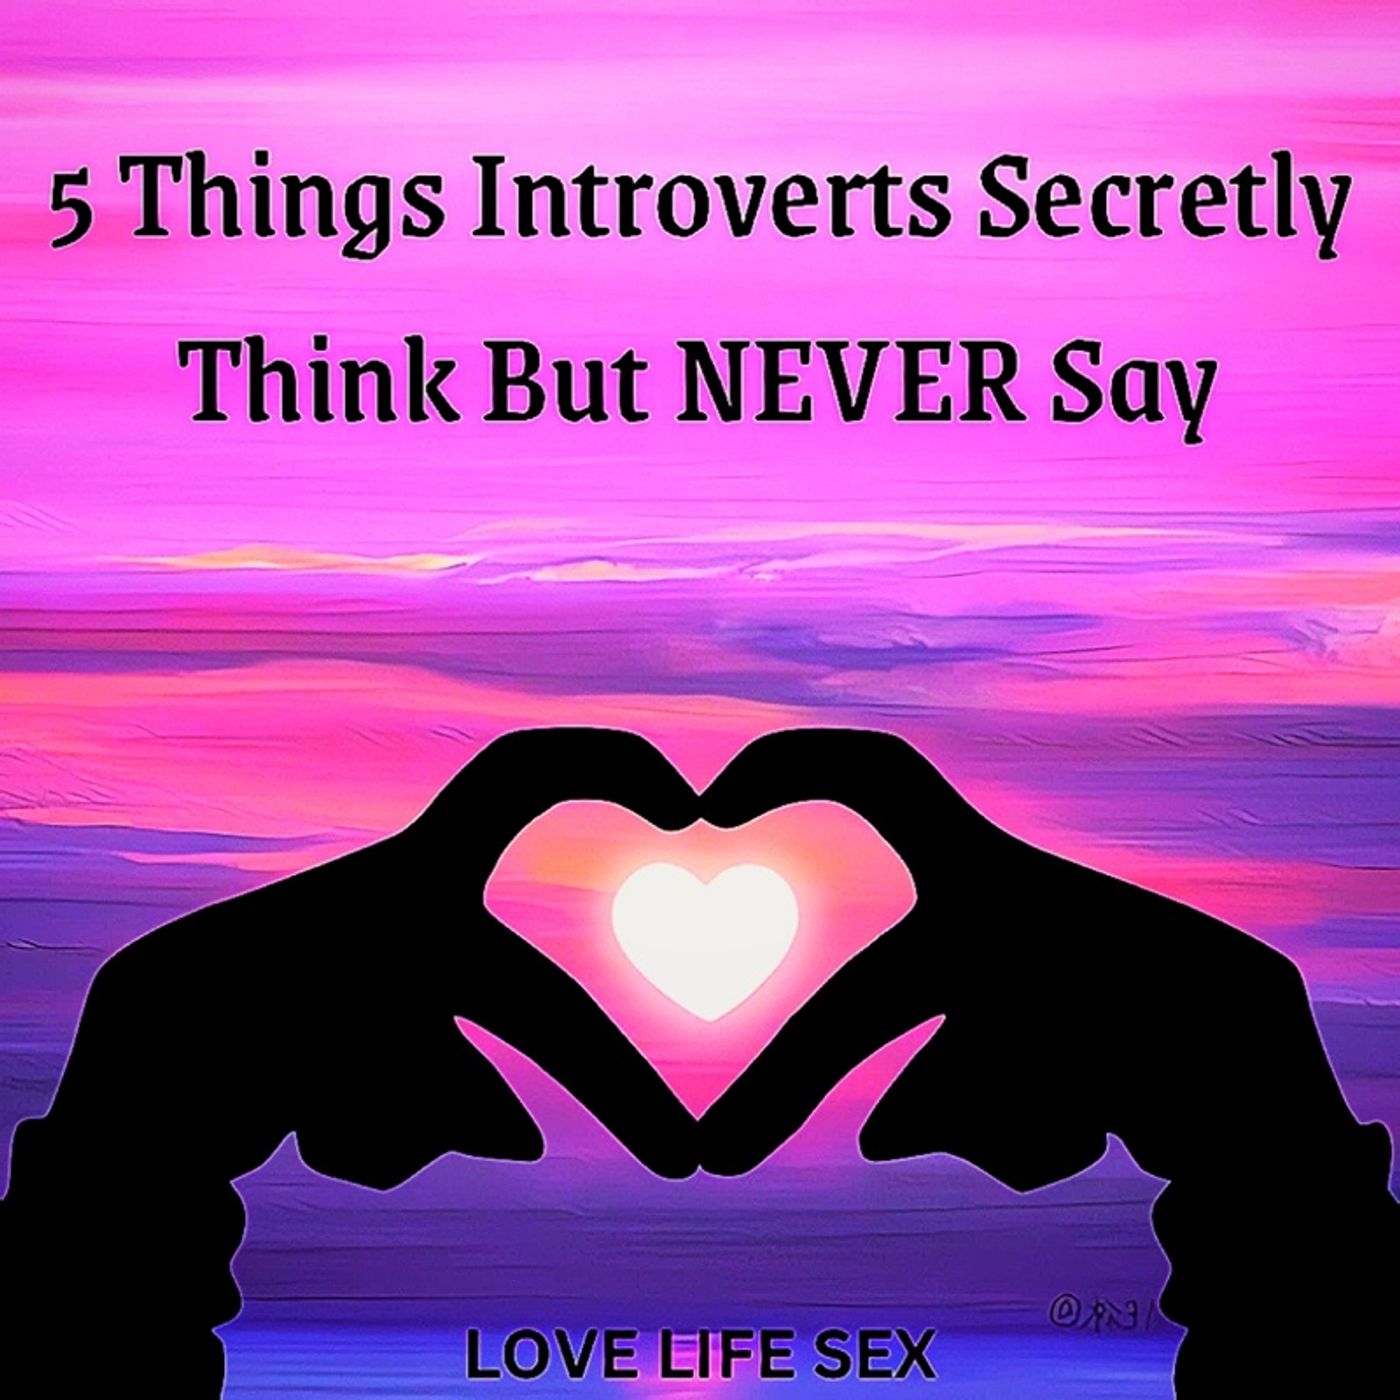 5 Things Introverts Secretly 🤫 Think But NEVER Say